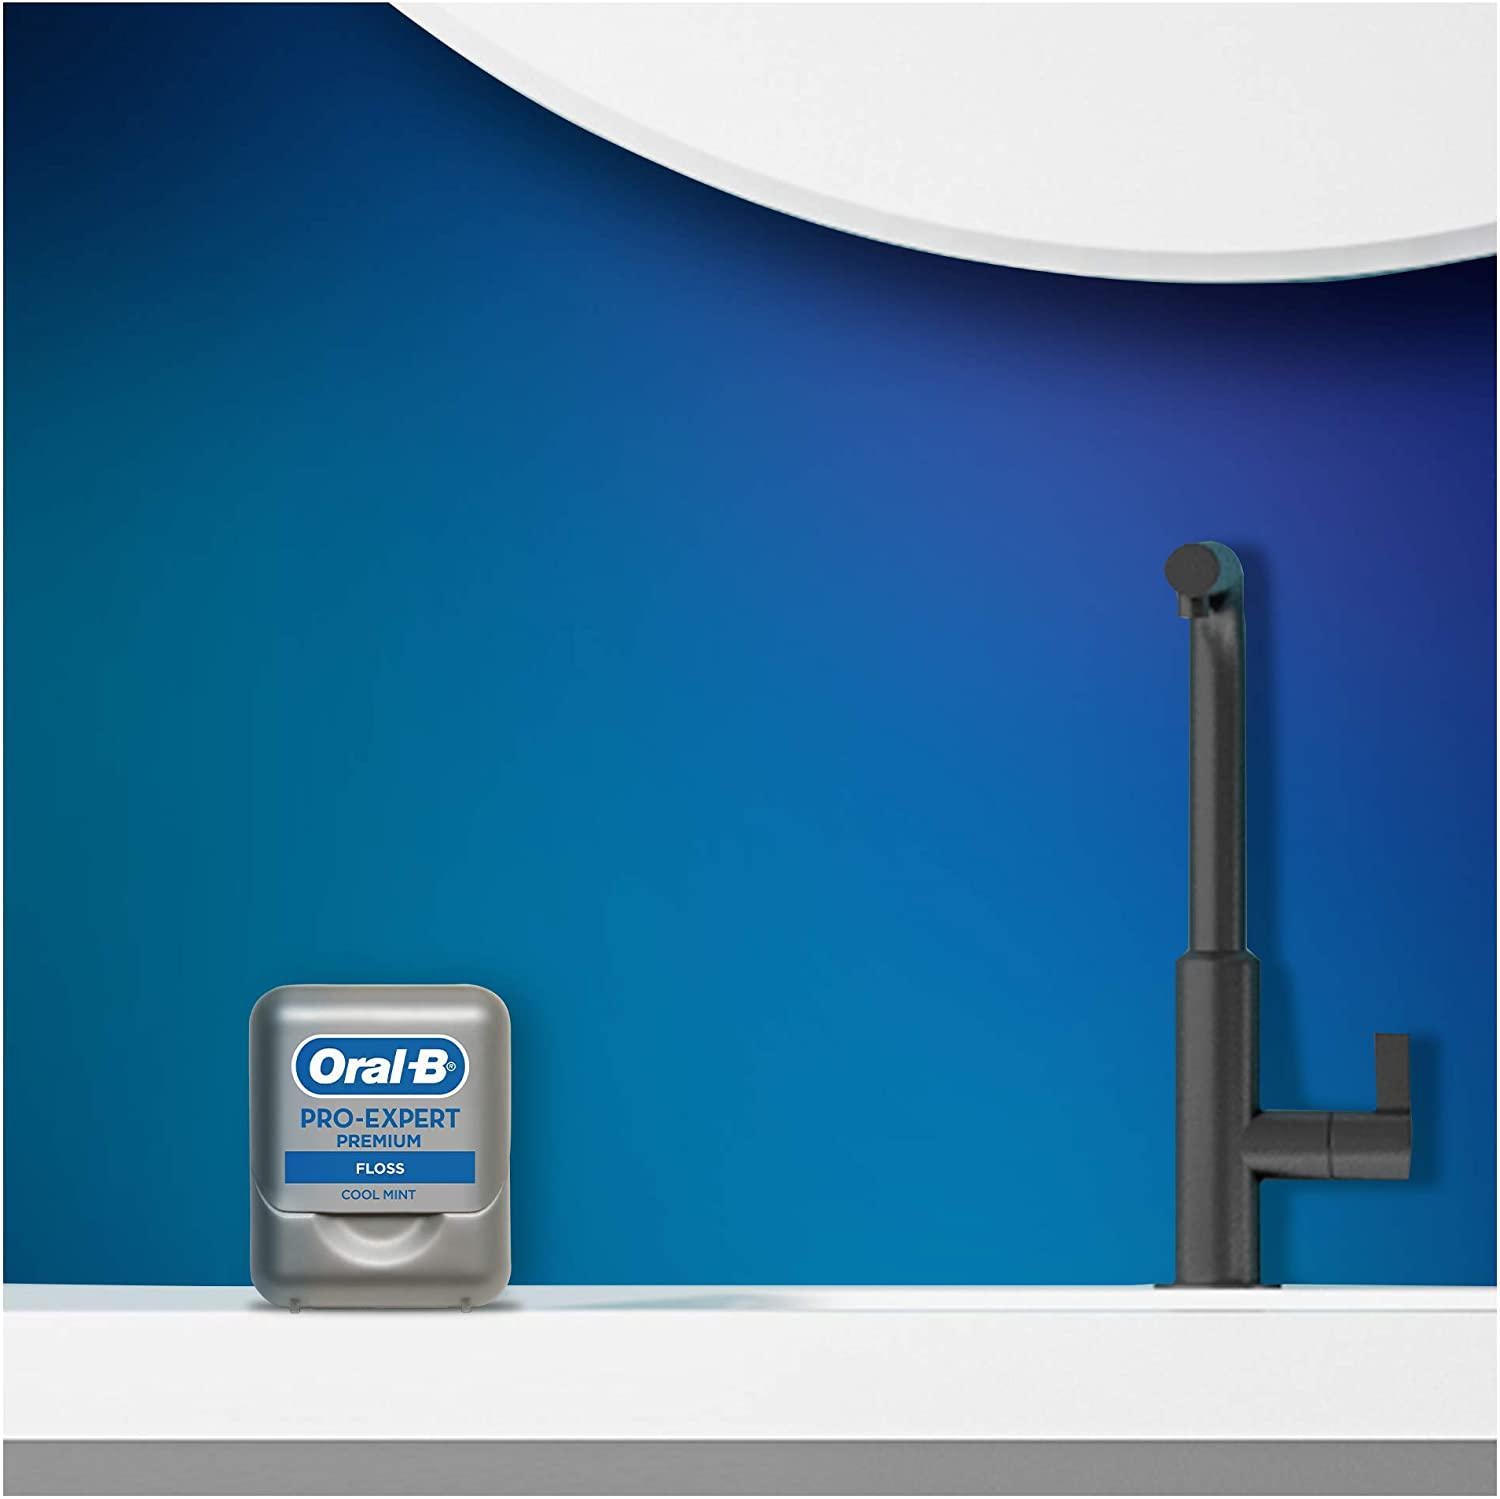 Oral-B Pro-Expert Premium Dental Floss - Clinically Proven, Cool Mint - 40M - Healthxpress.ie